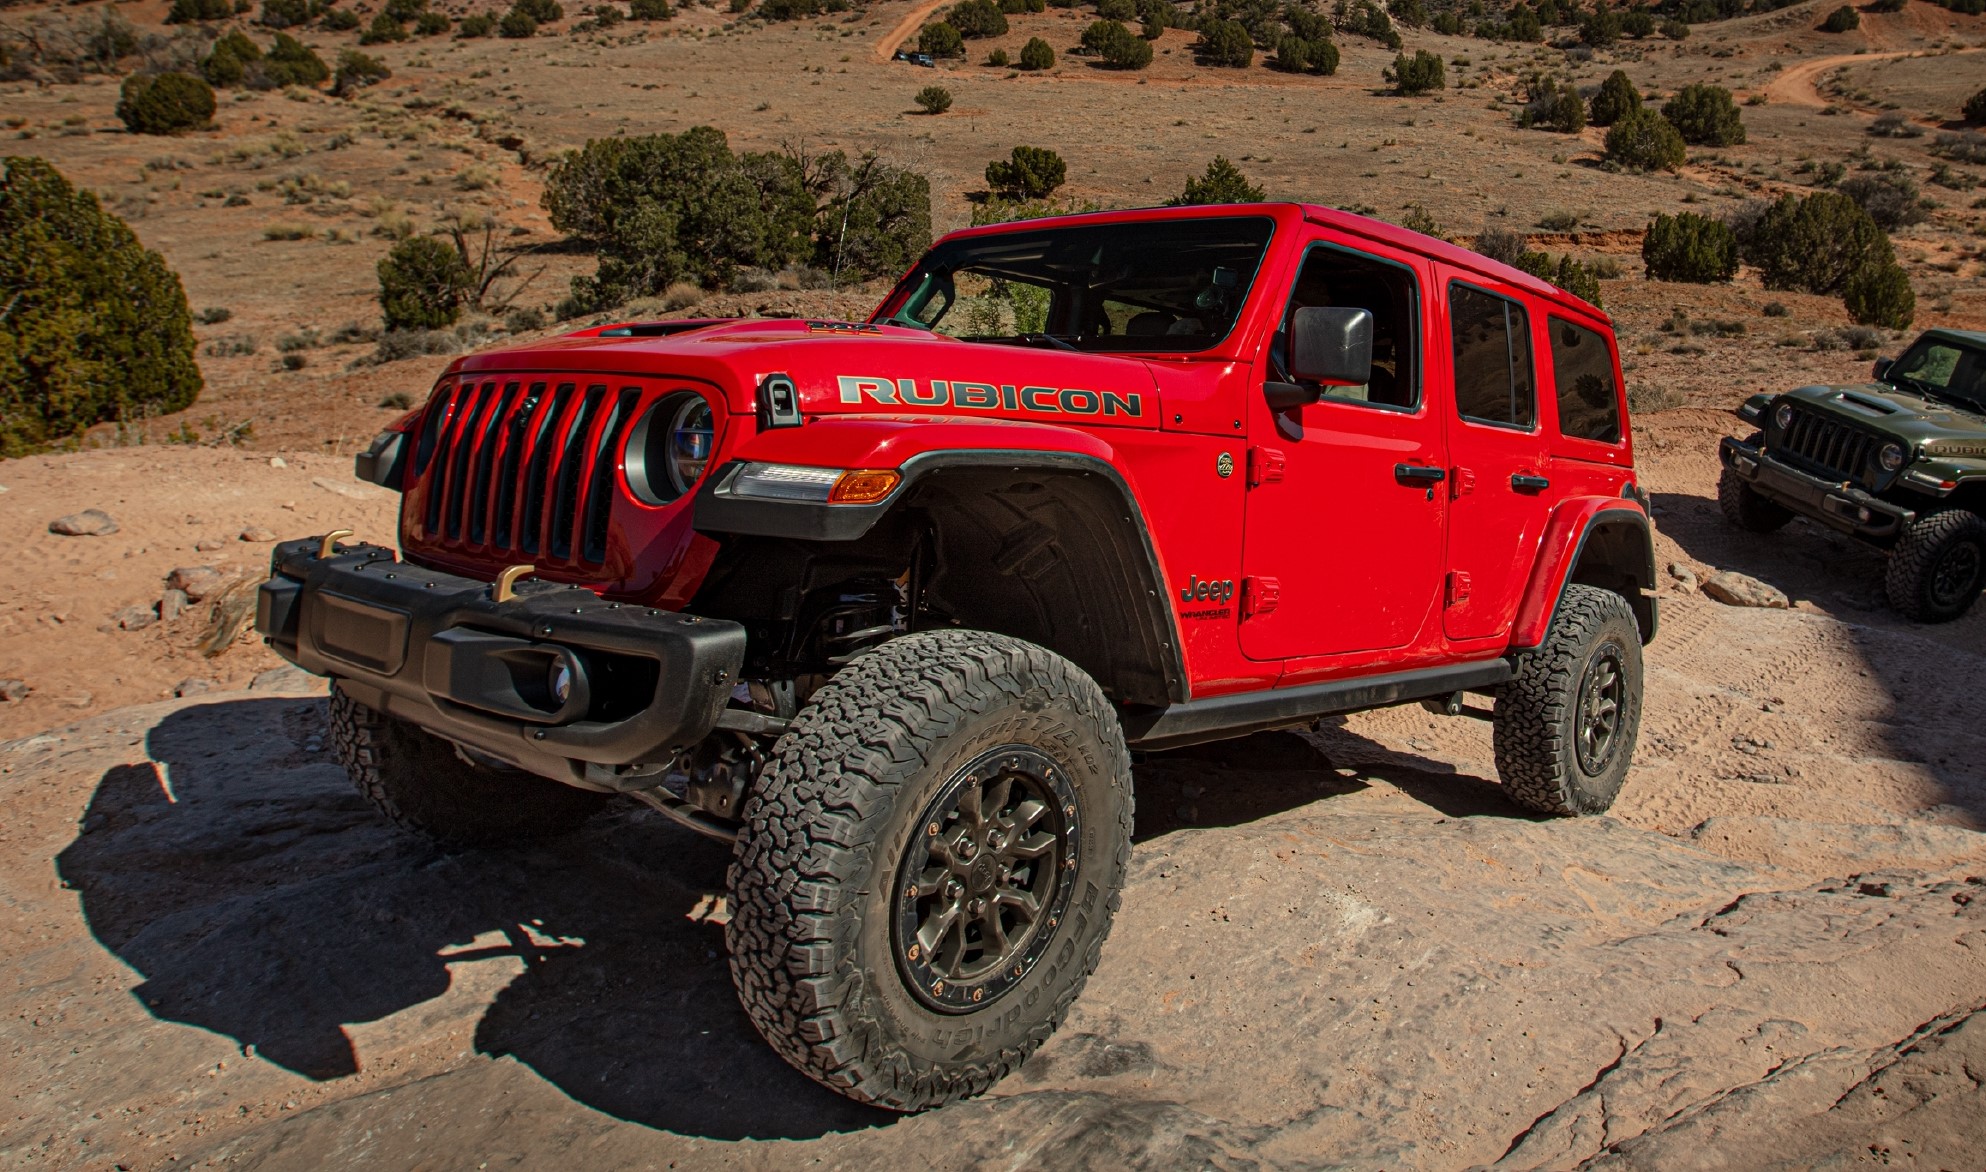 A front view of the The 2021 Jeep Wrangler Rubicon 392 Launch Edition